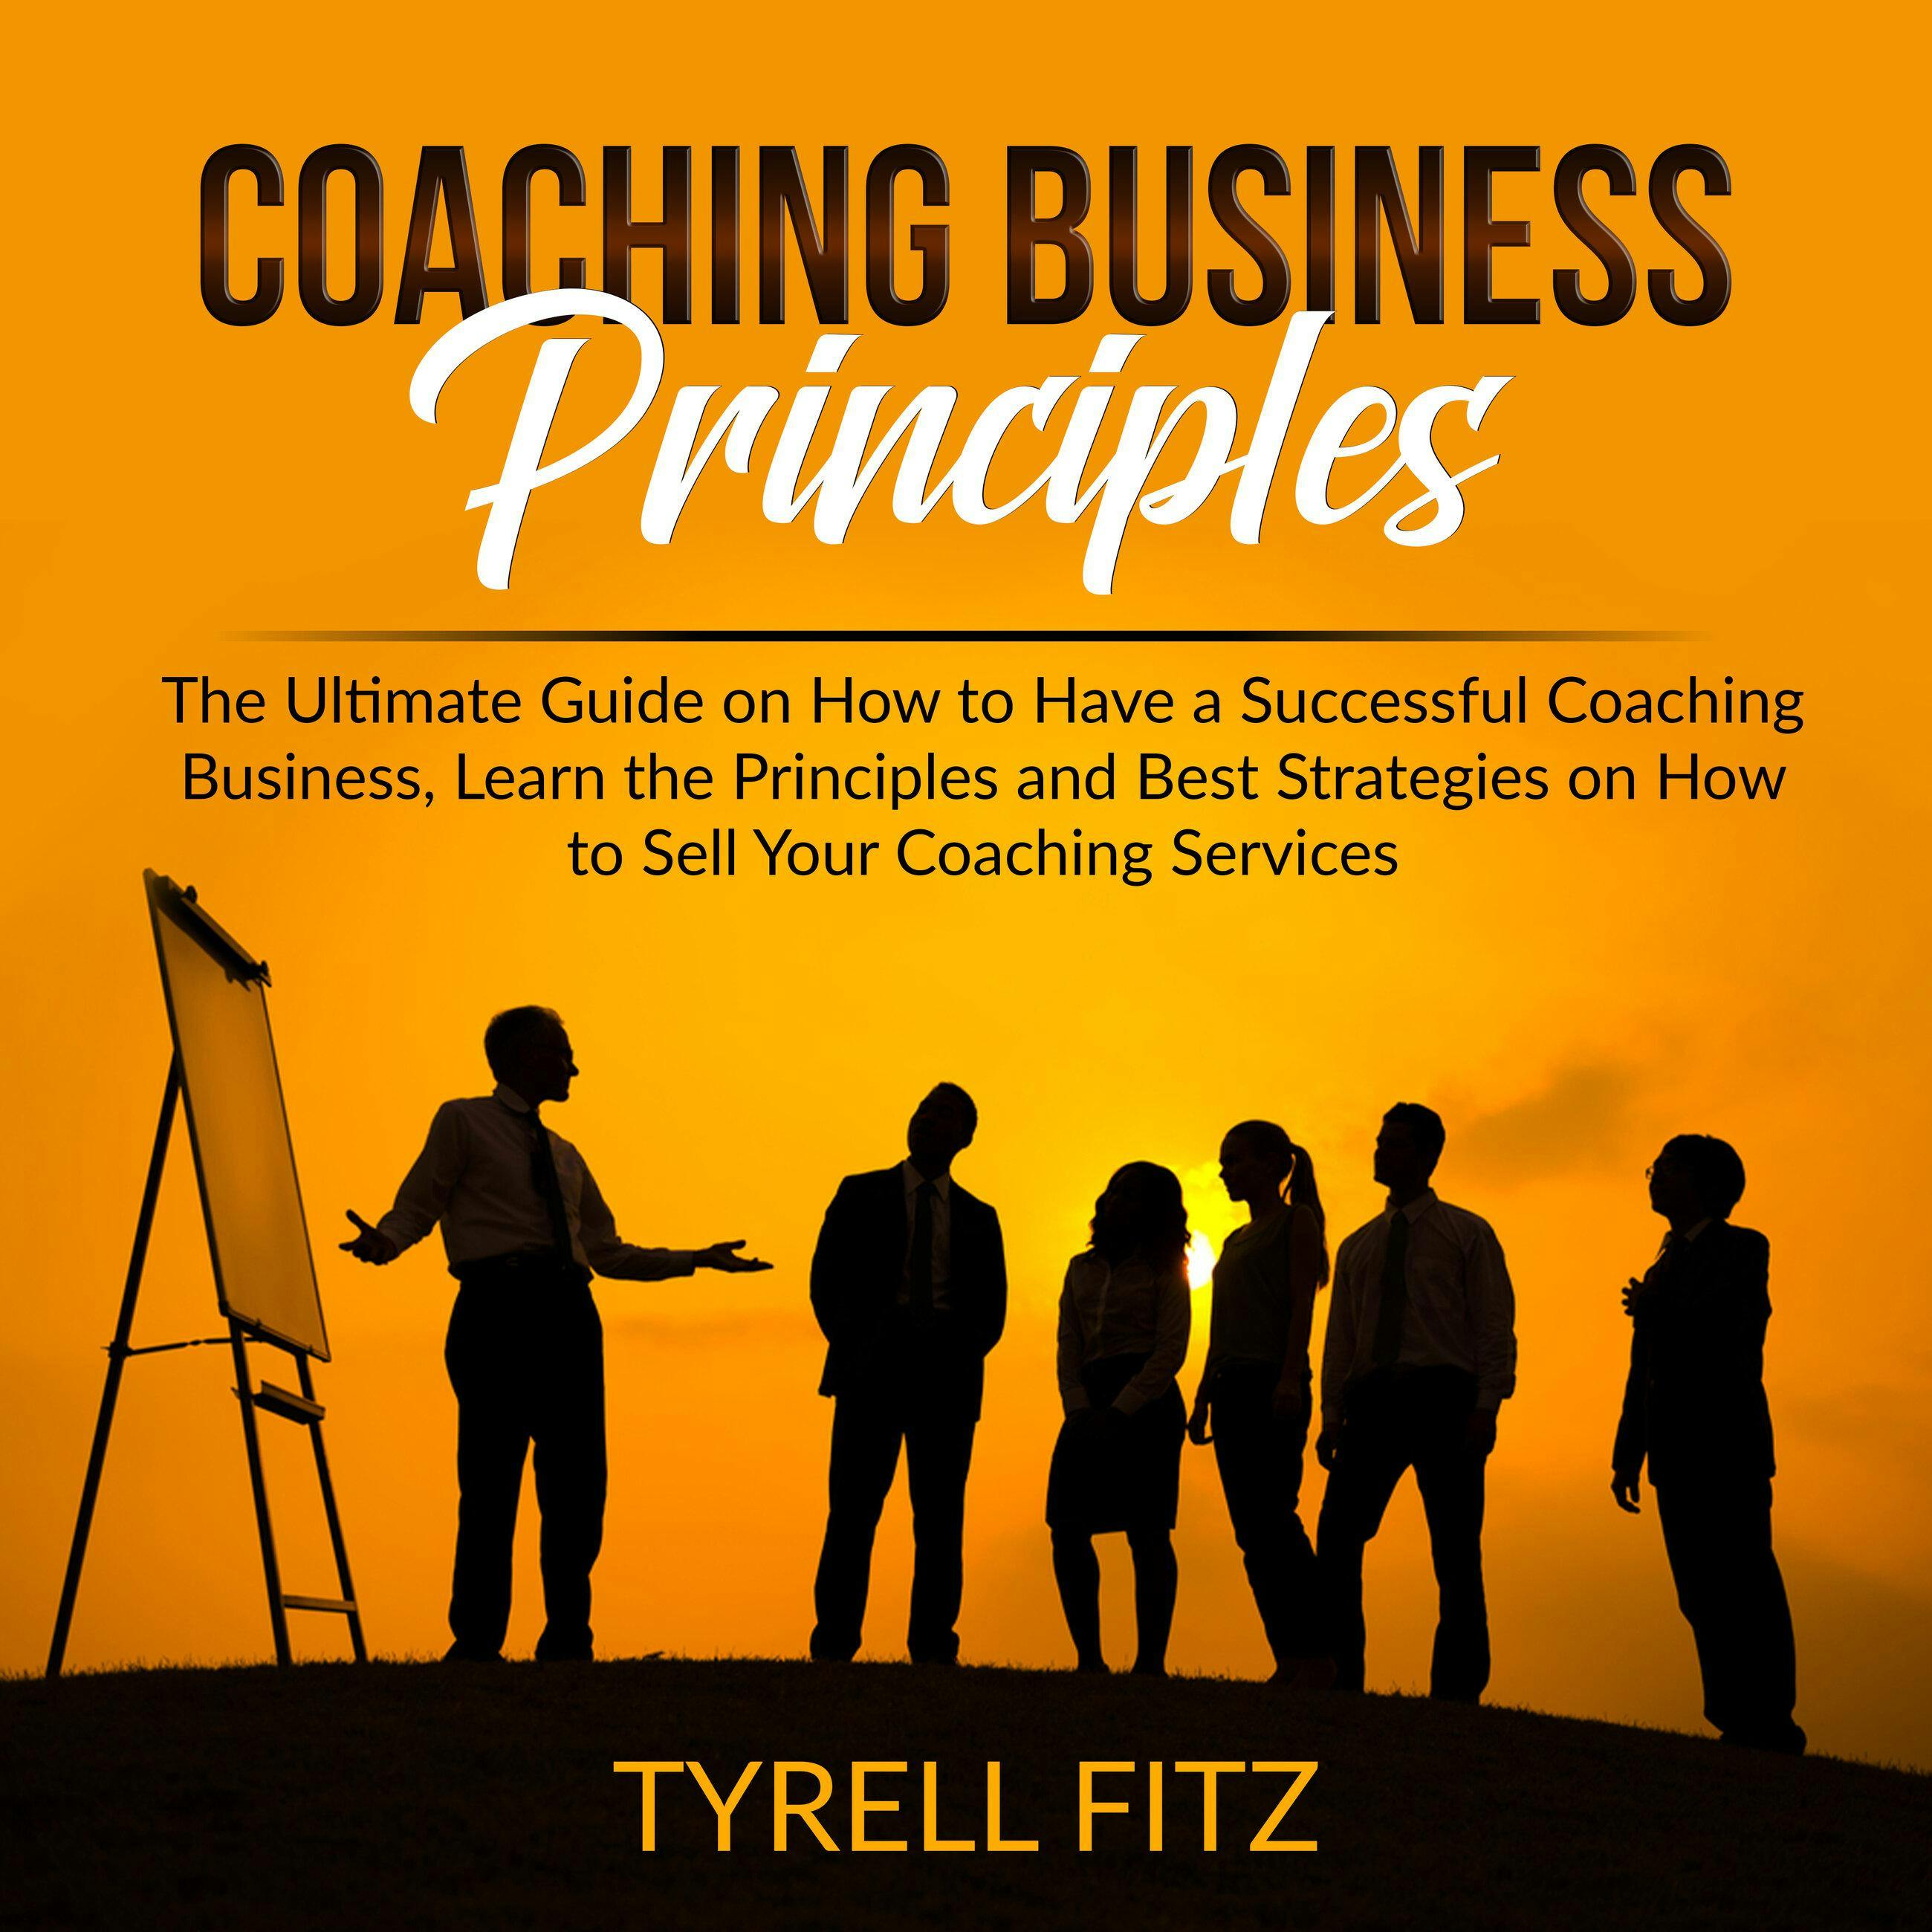 Coaching Business Principles: The Ultimate Guide on How to Have a Successful Coaching Business, Learn the Principles and Best Strategies on How to Sell Your Coaching Services - undefined